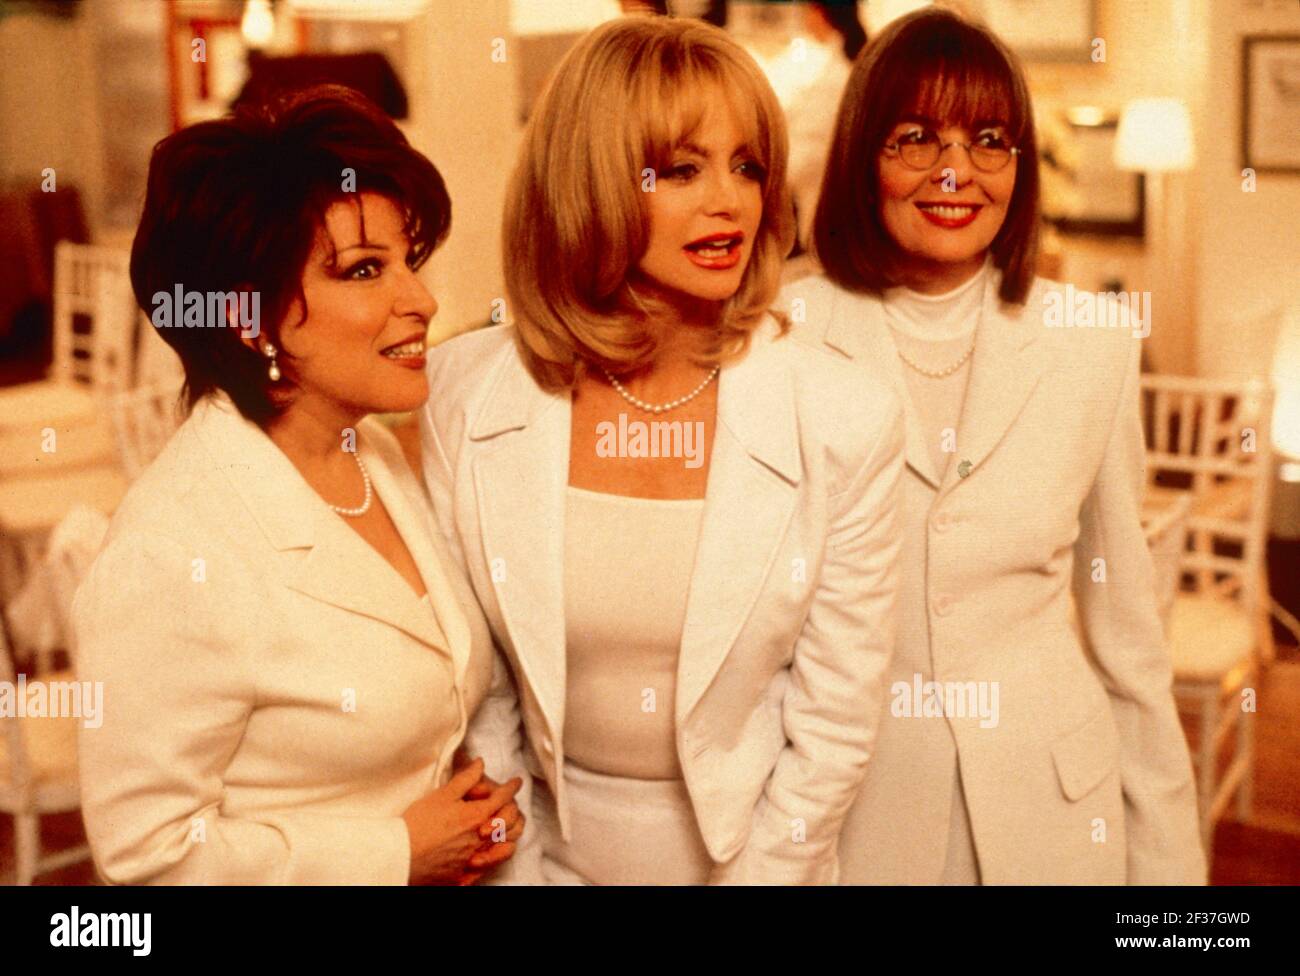 Los Angeles.CA.USA.  Bette Midler, Goldie Hawn and Diane Keaton  in © Paramount Pictures film, The First Wives Club (1996) Director:Hugh Wilson Writers: Robert Harling Source:  Olivia Goldsmith novel with samt title. Ref:LMK106-SLIB040321-001 Supplied by LMKMEDIA. Editorial Only. Landmark Media is not the copyright owner of these Film or TV stills but provides a service only for recognised Media outlets. pictures@lmkmedia.com Stock Photo